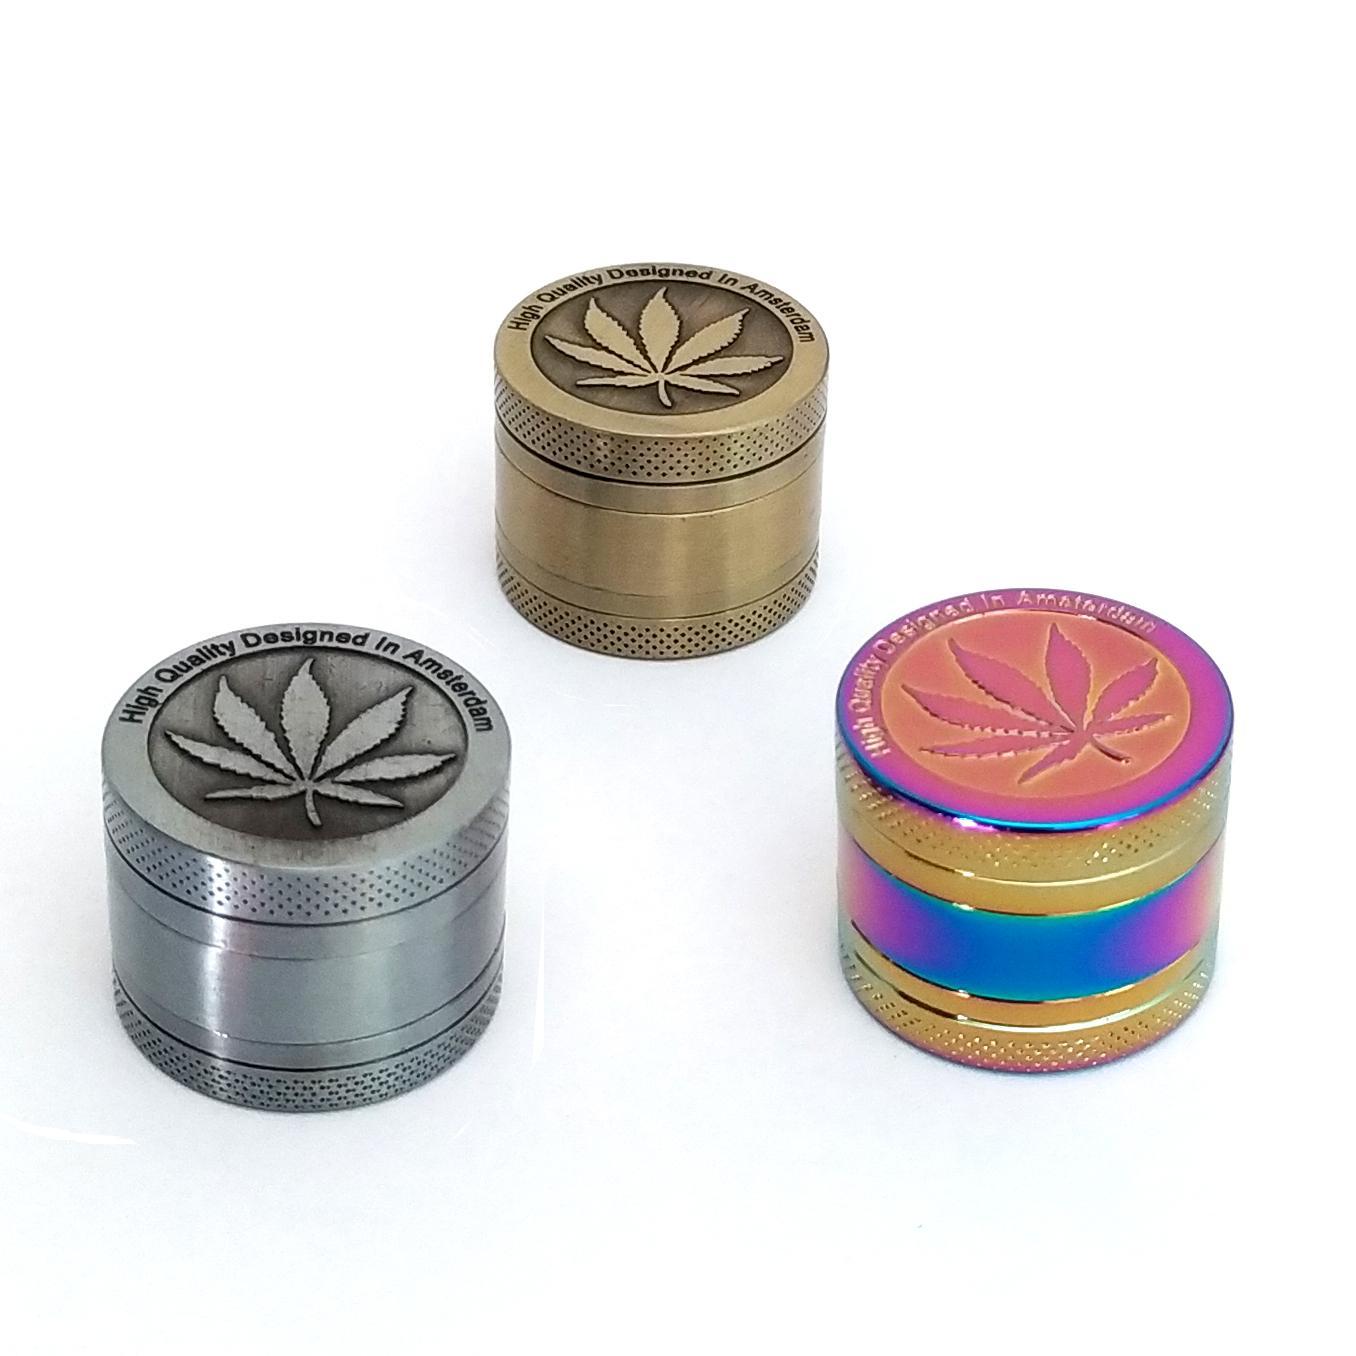 

4 Layer 3 layers smoking accessories 40mm 50mm Diameter Zinc Alloy Rainbow Laser Color Mini Tobacco Grinders Spice Crusher Herb Grinder